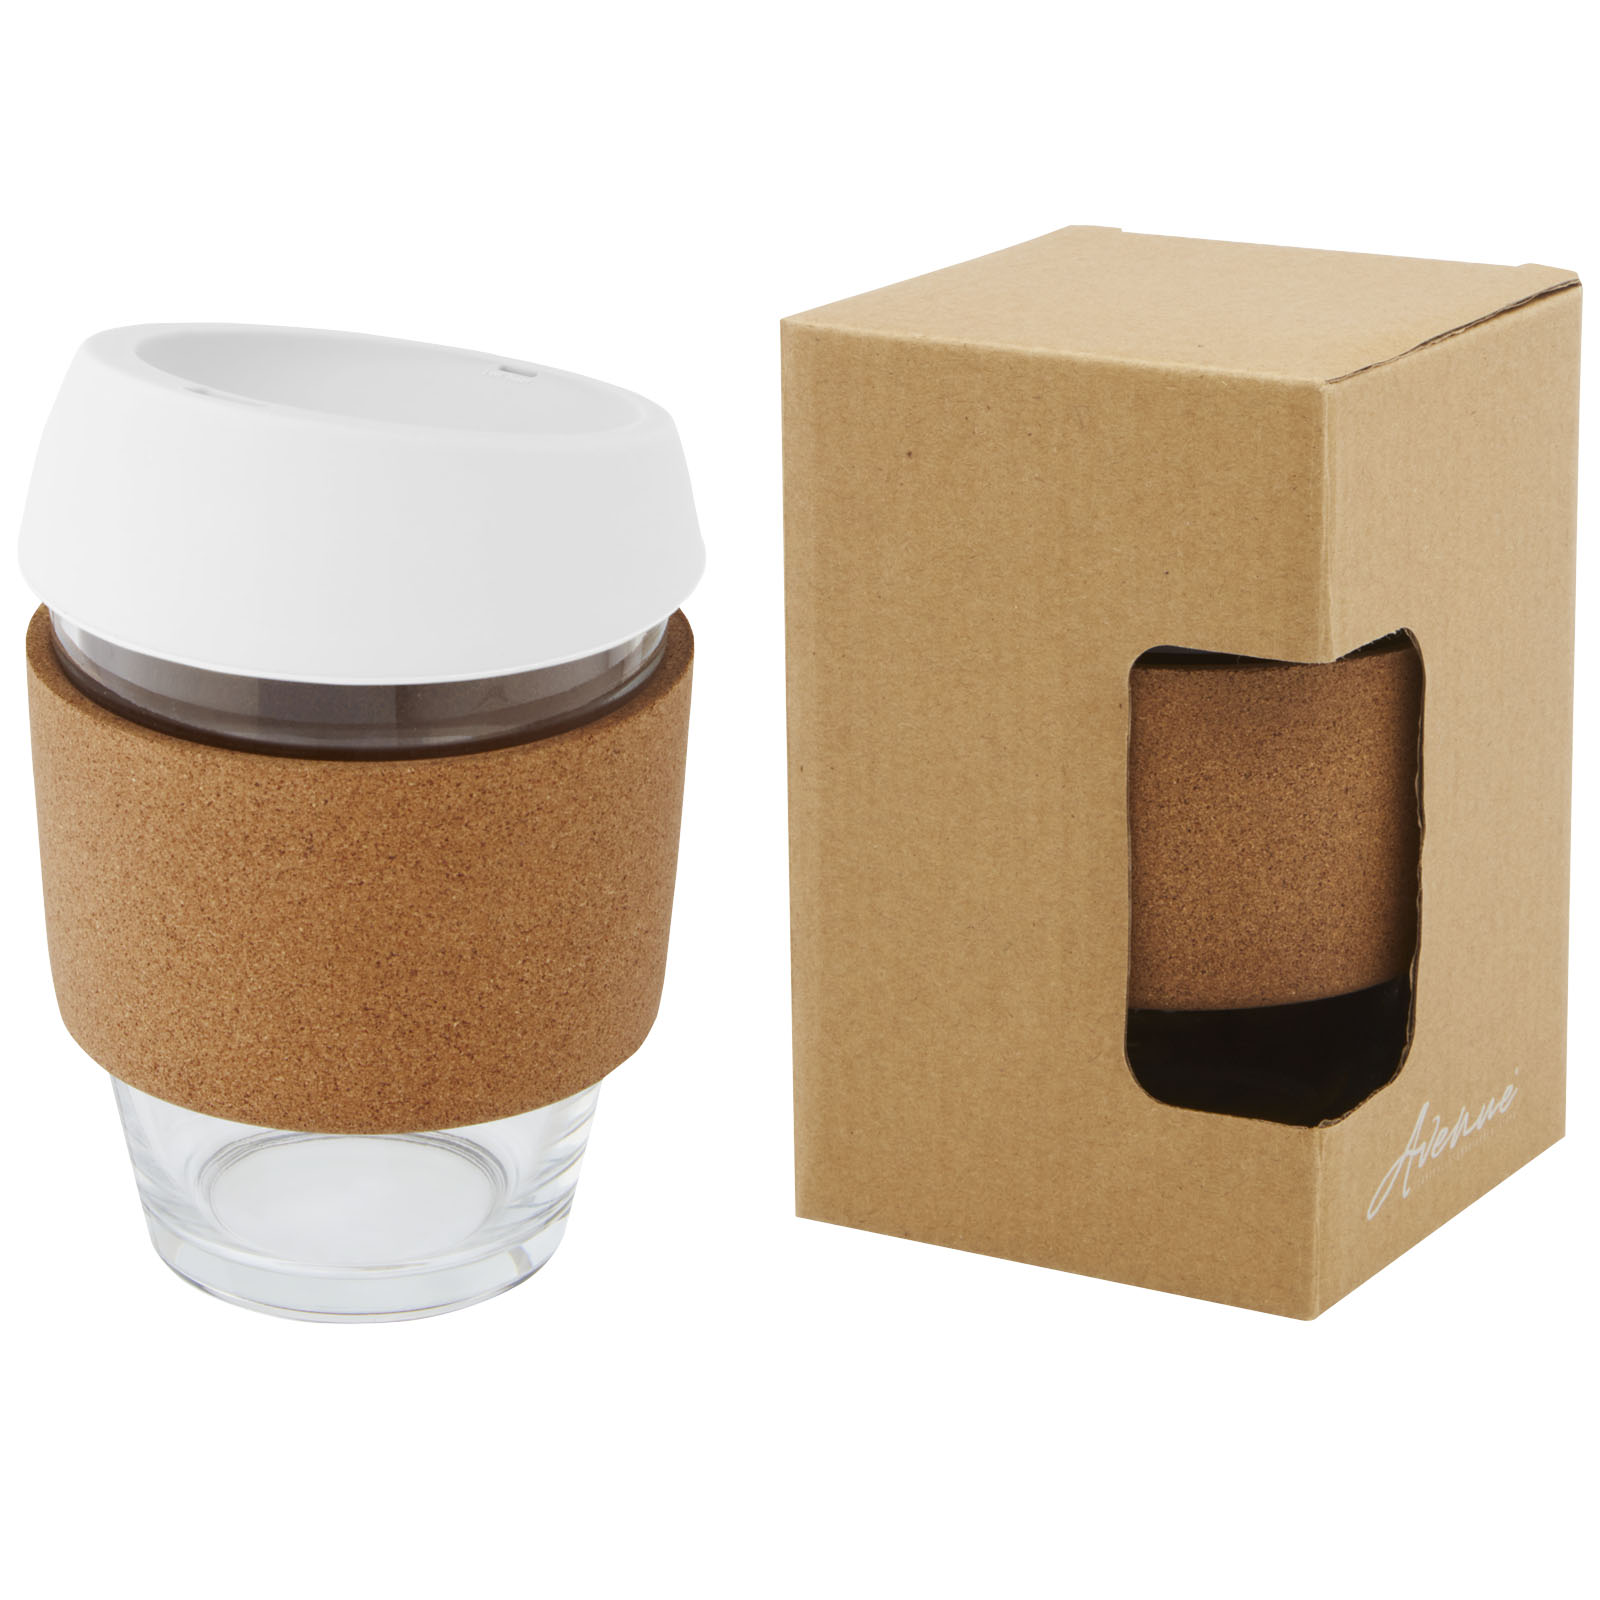 Advertising Travel mugs - Lidan 360 ml borosilicate glass tumbler with cork grip and silicone lid